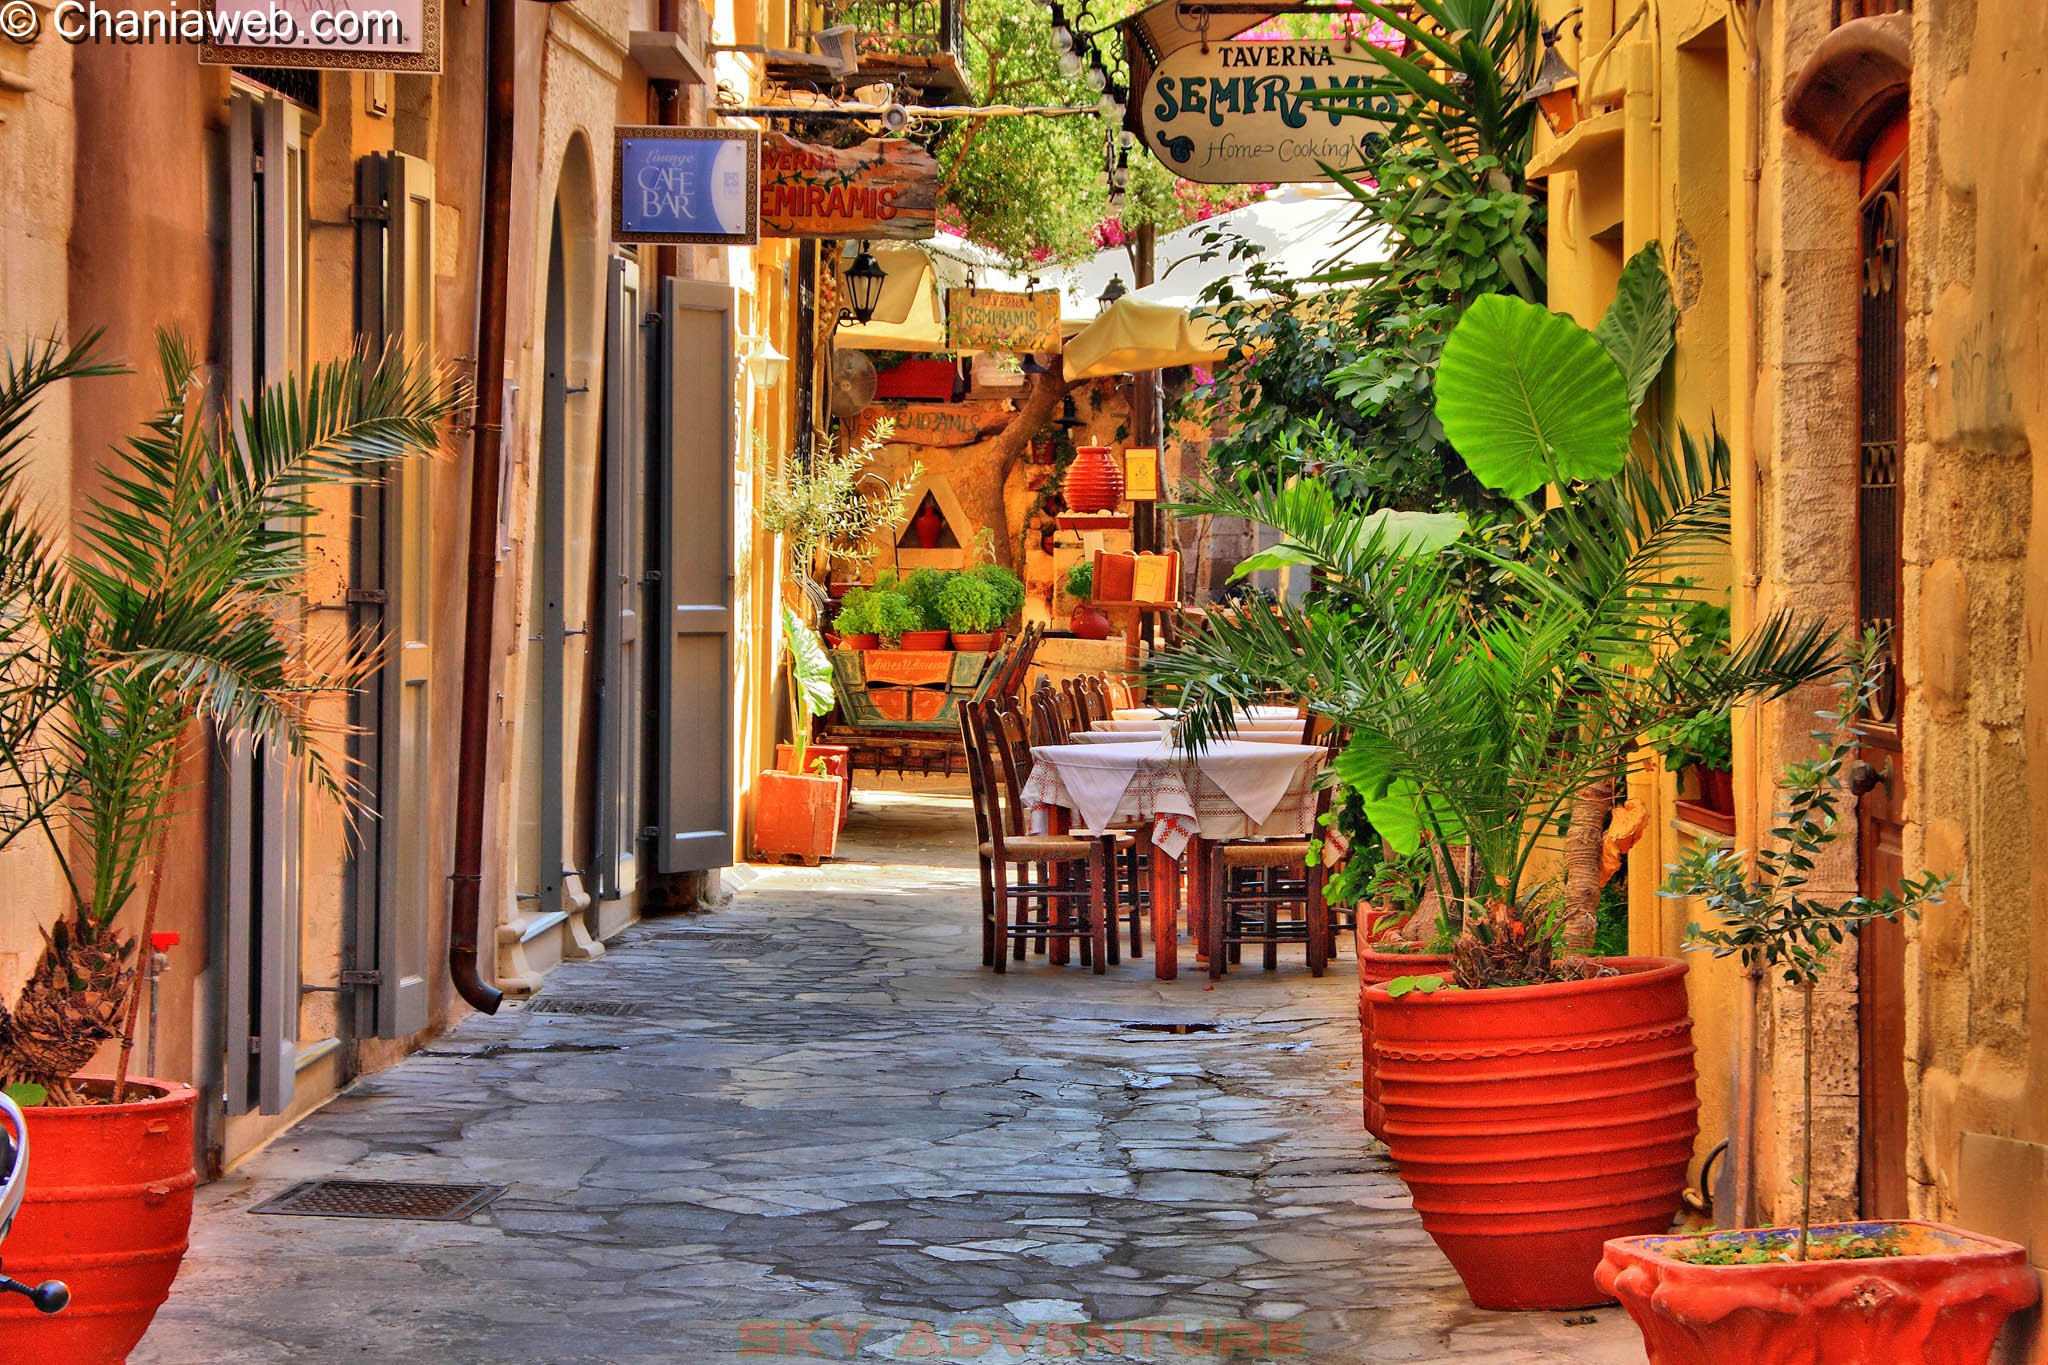 Visiting the Old Town in Chania, Greece